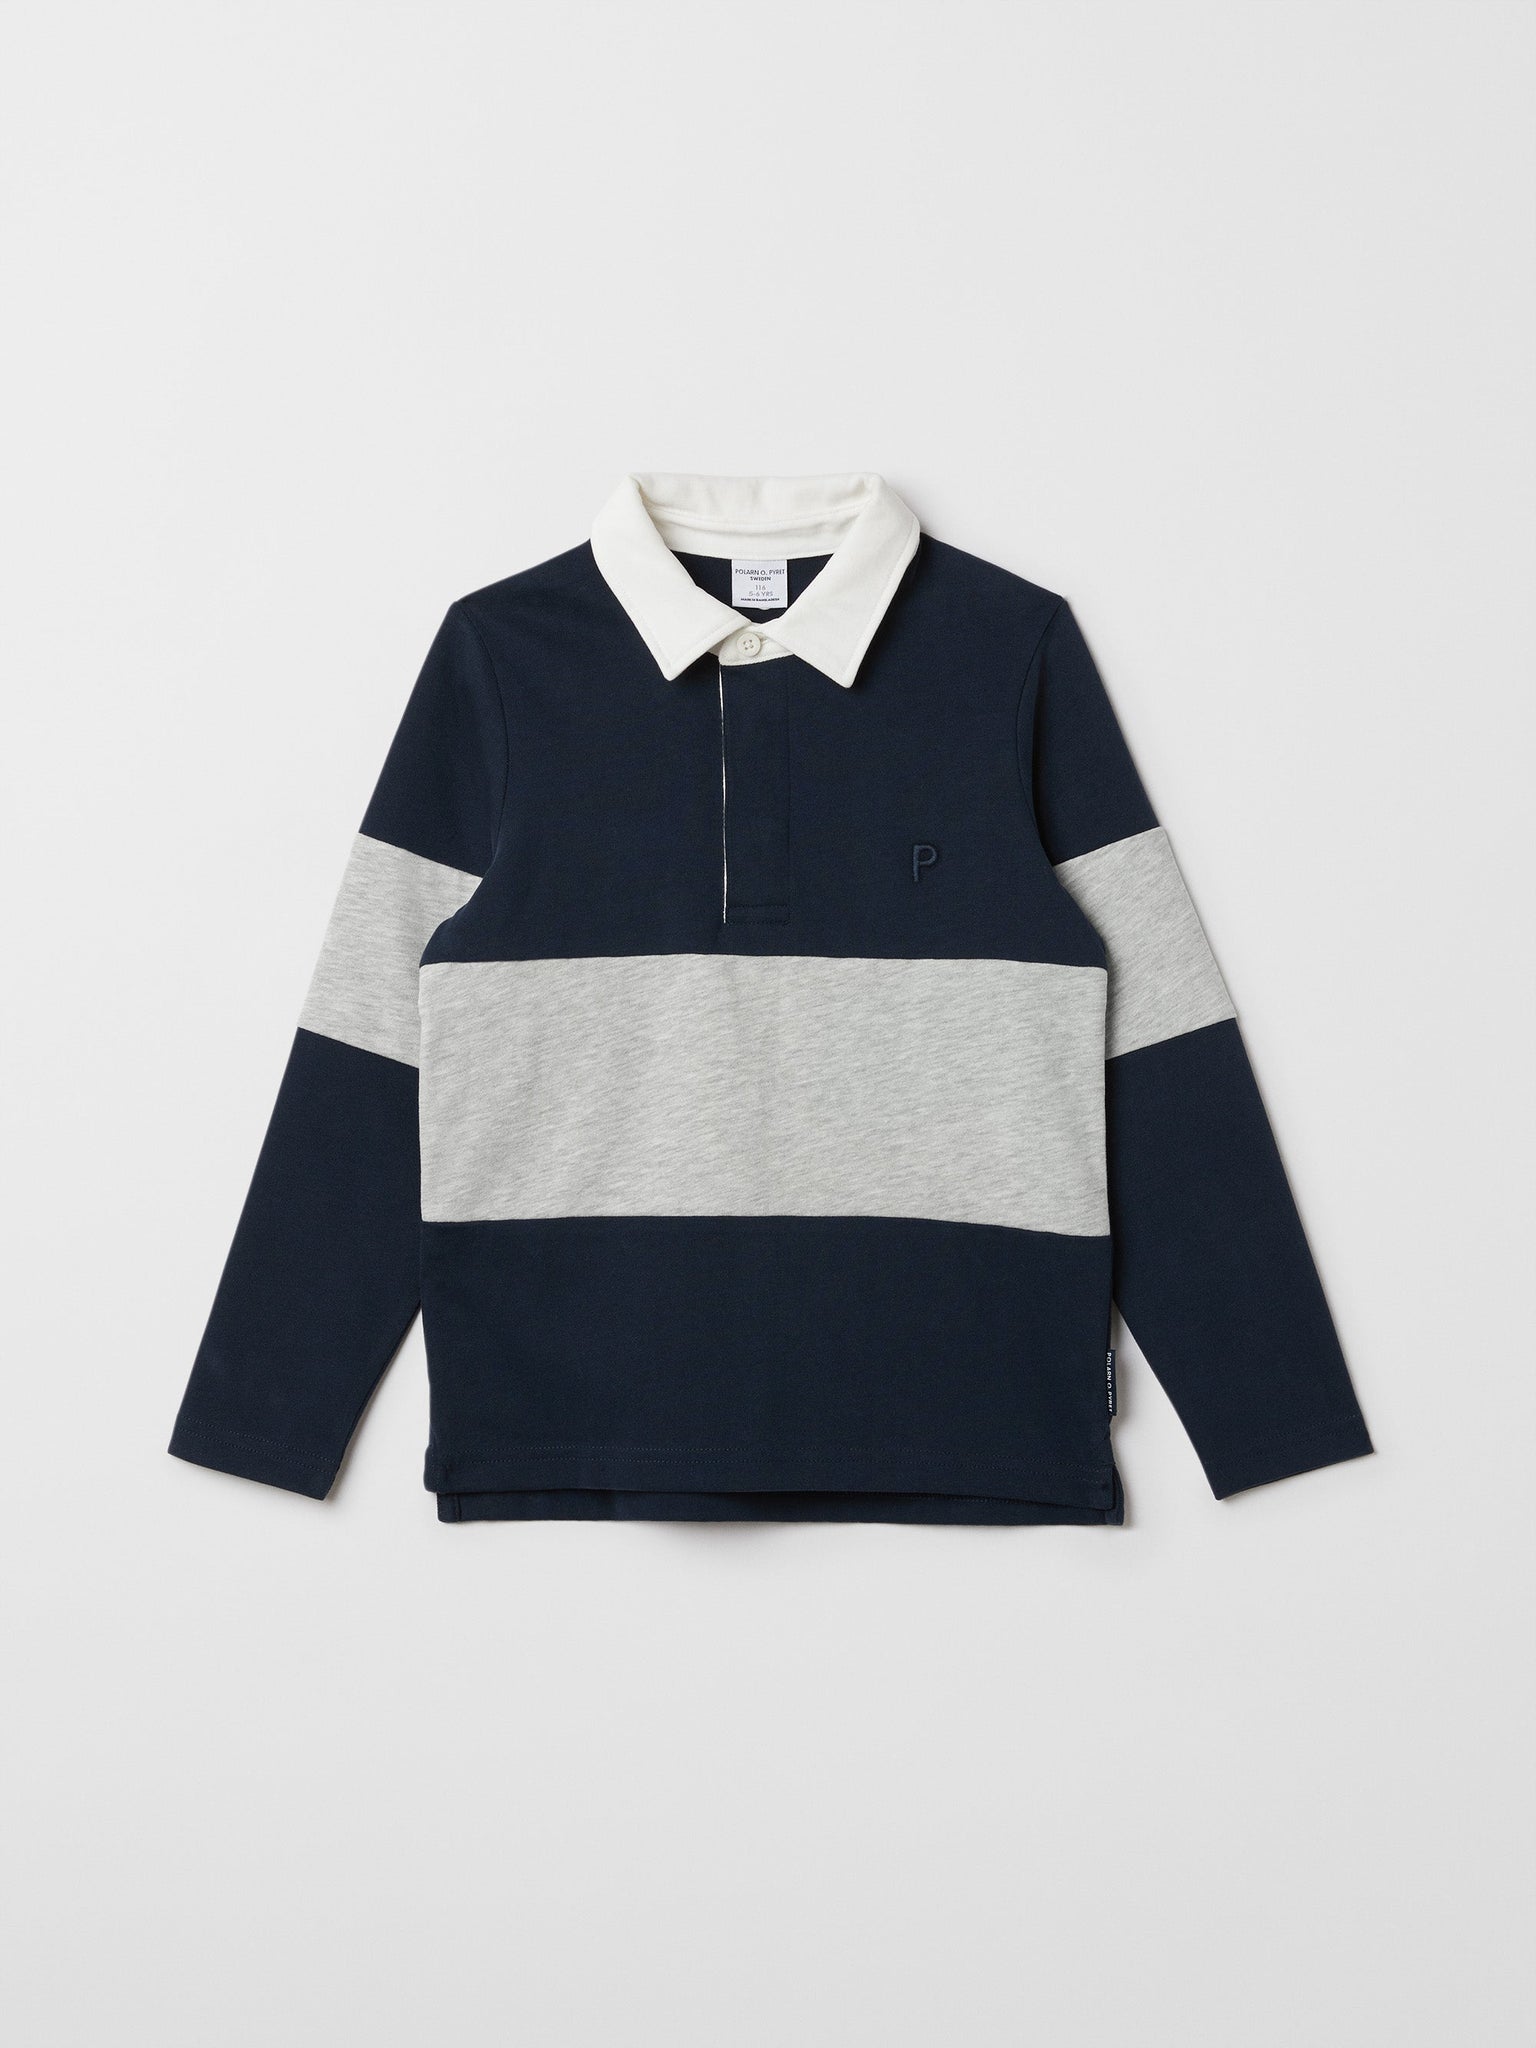 Organic Cotton Kids Rugby Shirt from the Polarn O. Pyret kidswear collection. Clothes made using sustainably sourced materials.